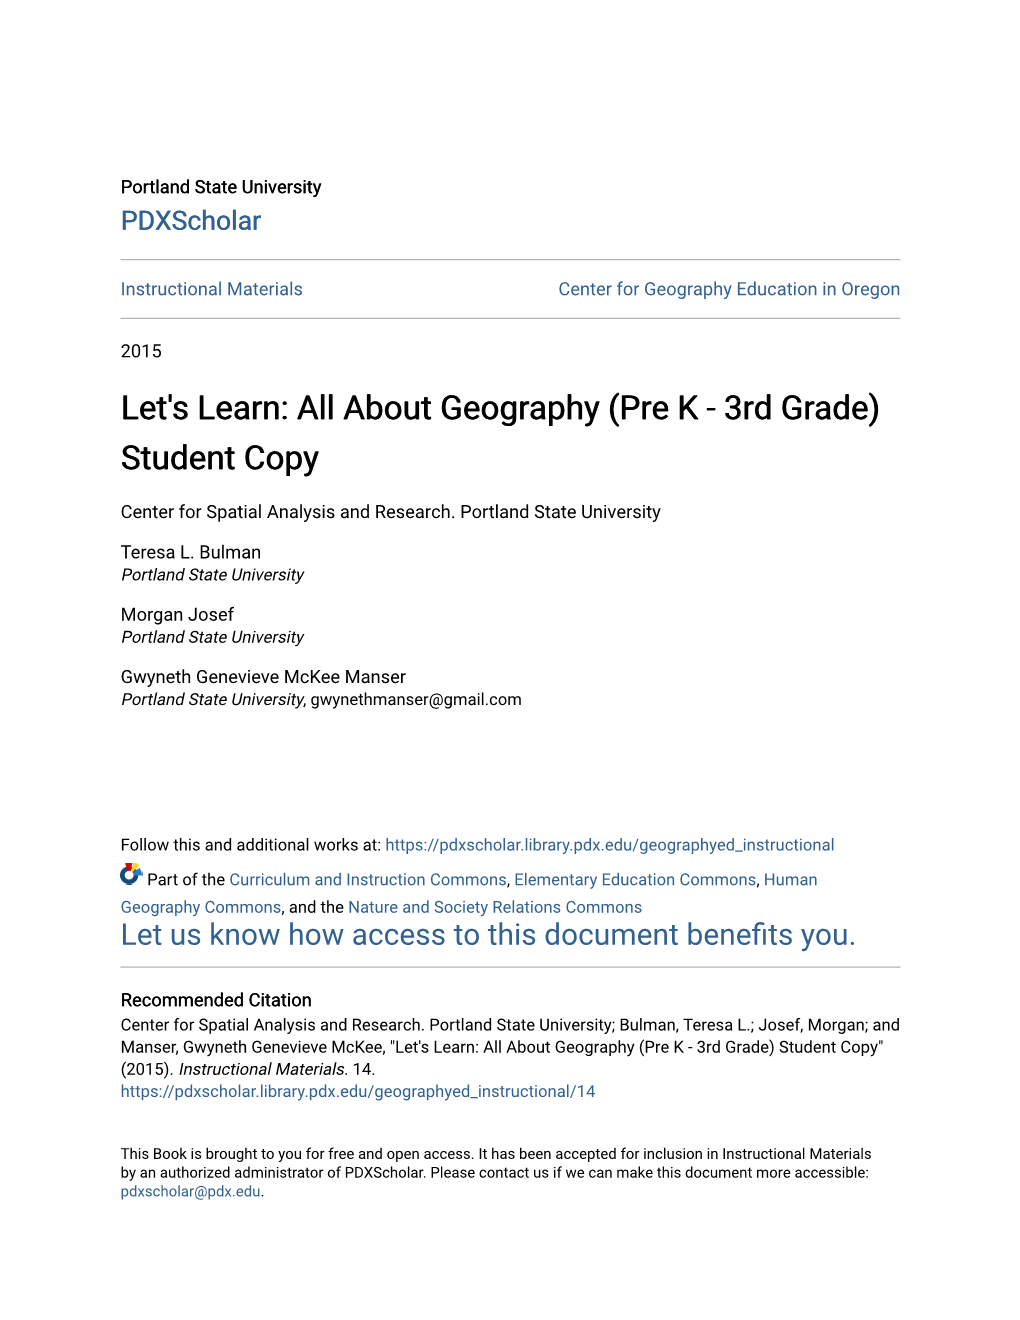 About Geography (Pre K - 3Rd Grade) Student Copy